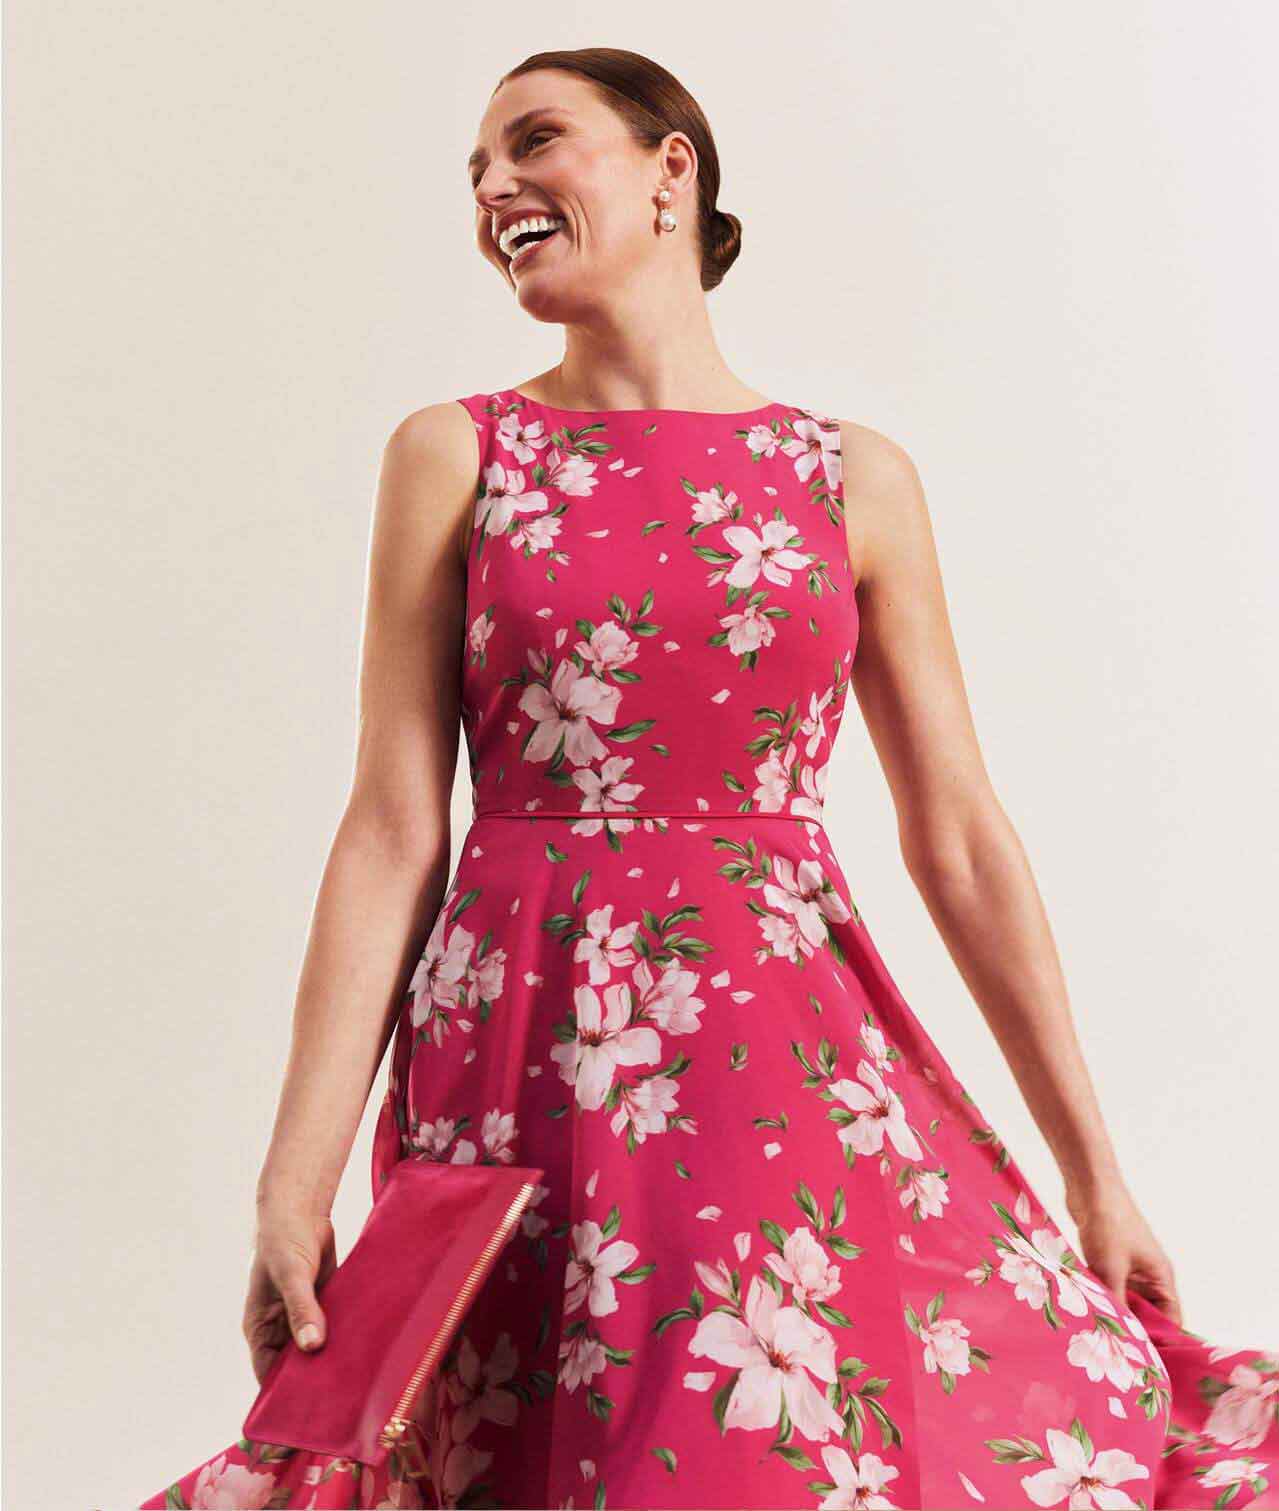 Hobbs model wears a pink floral midi dress with a matching clutch bag.